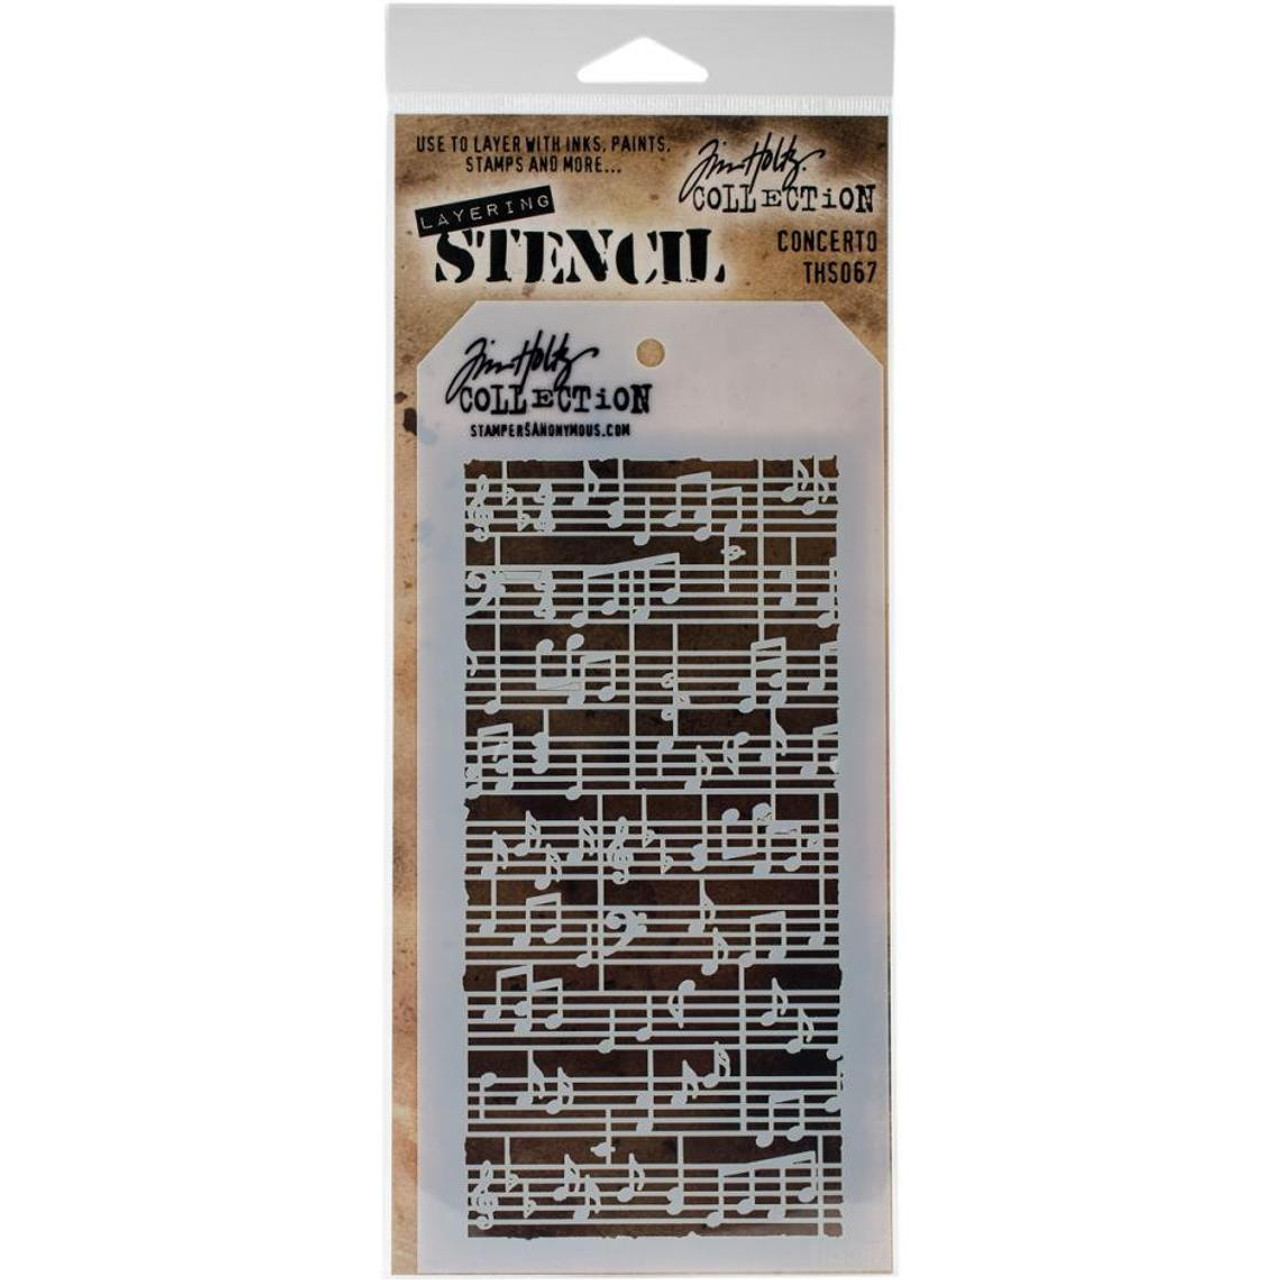 Concerto Layering Stencil - Stampers Anonymous - Tim Holtz- Great for backgrounds!